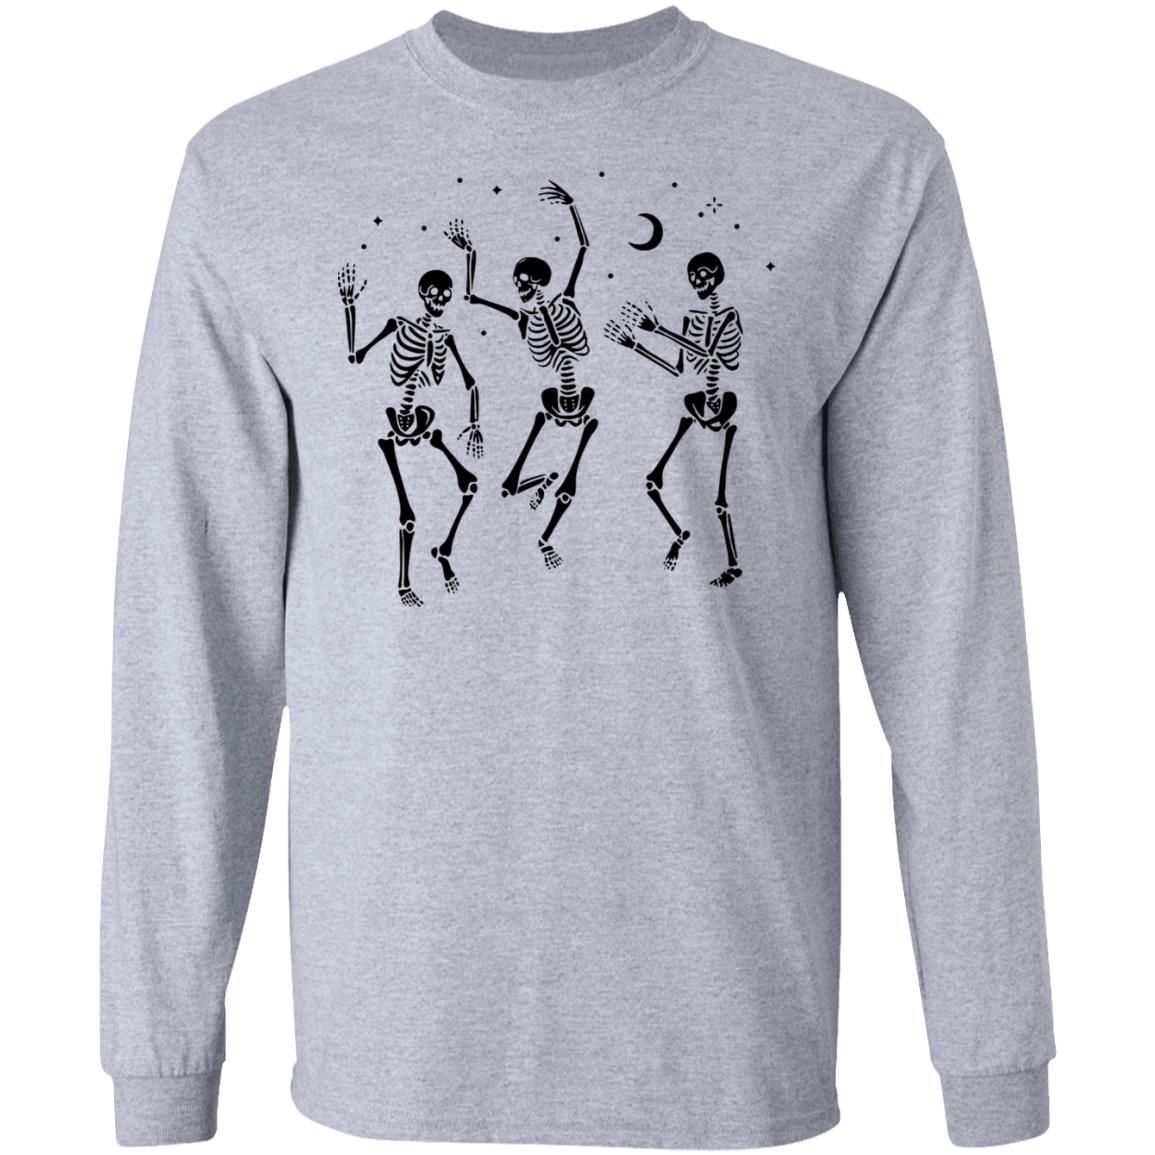 Halloween Party Dancing Skeleton Shirt Style: LS Ultra Cotton T-Shirt, Color: Sport Grey